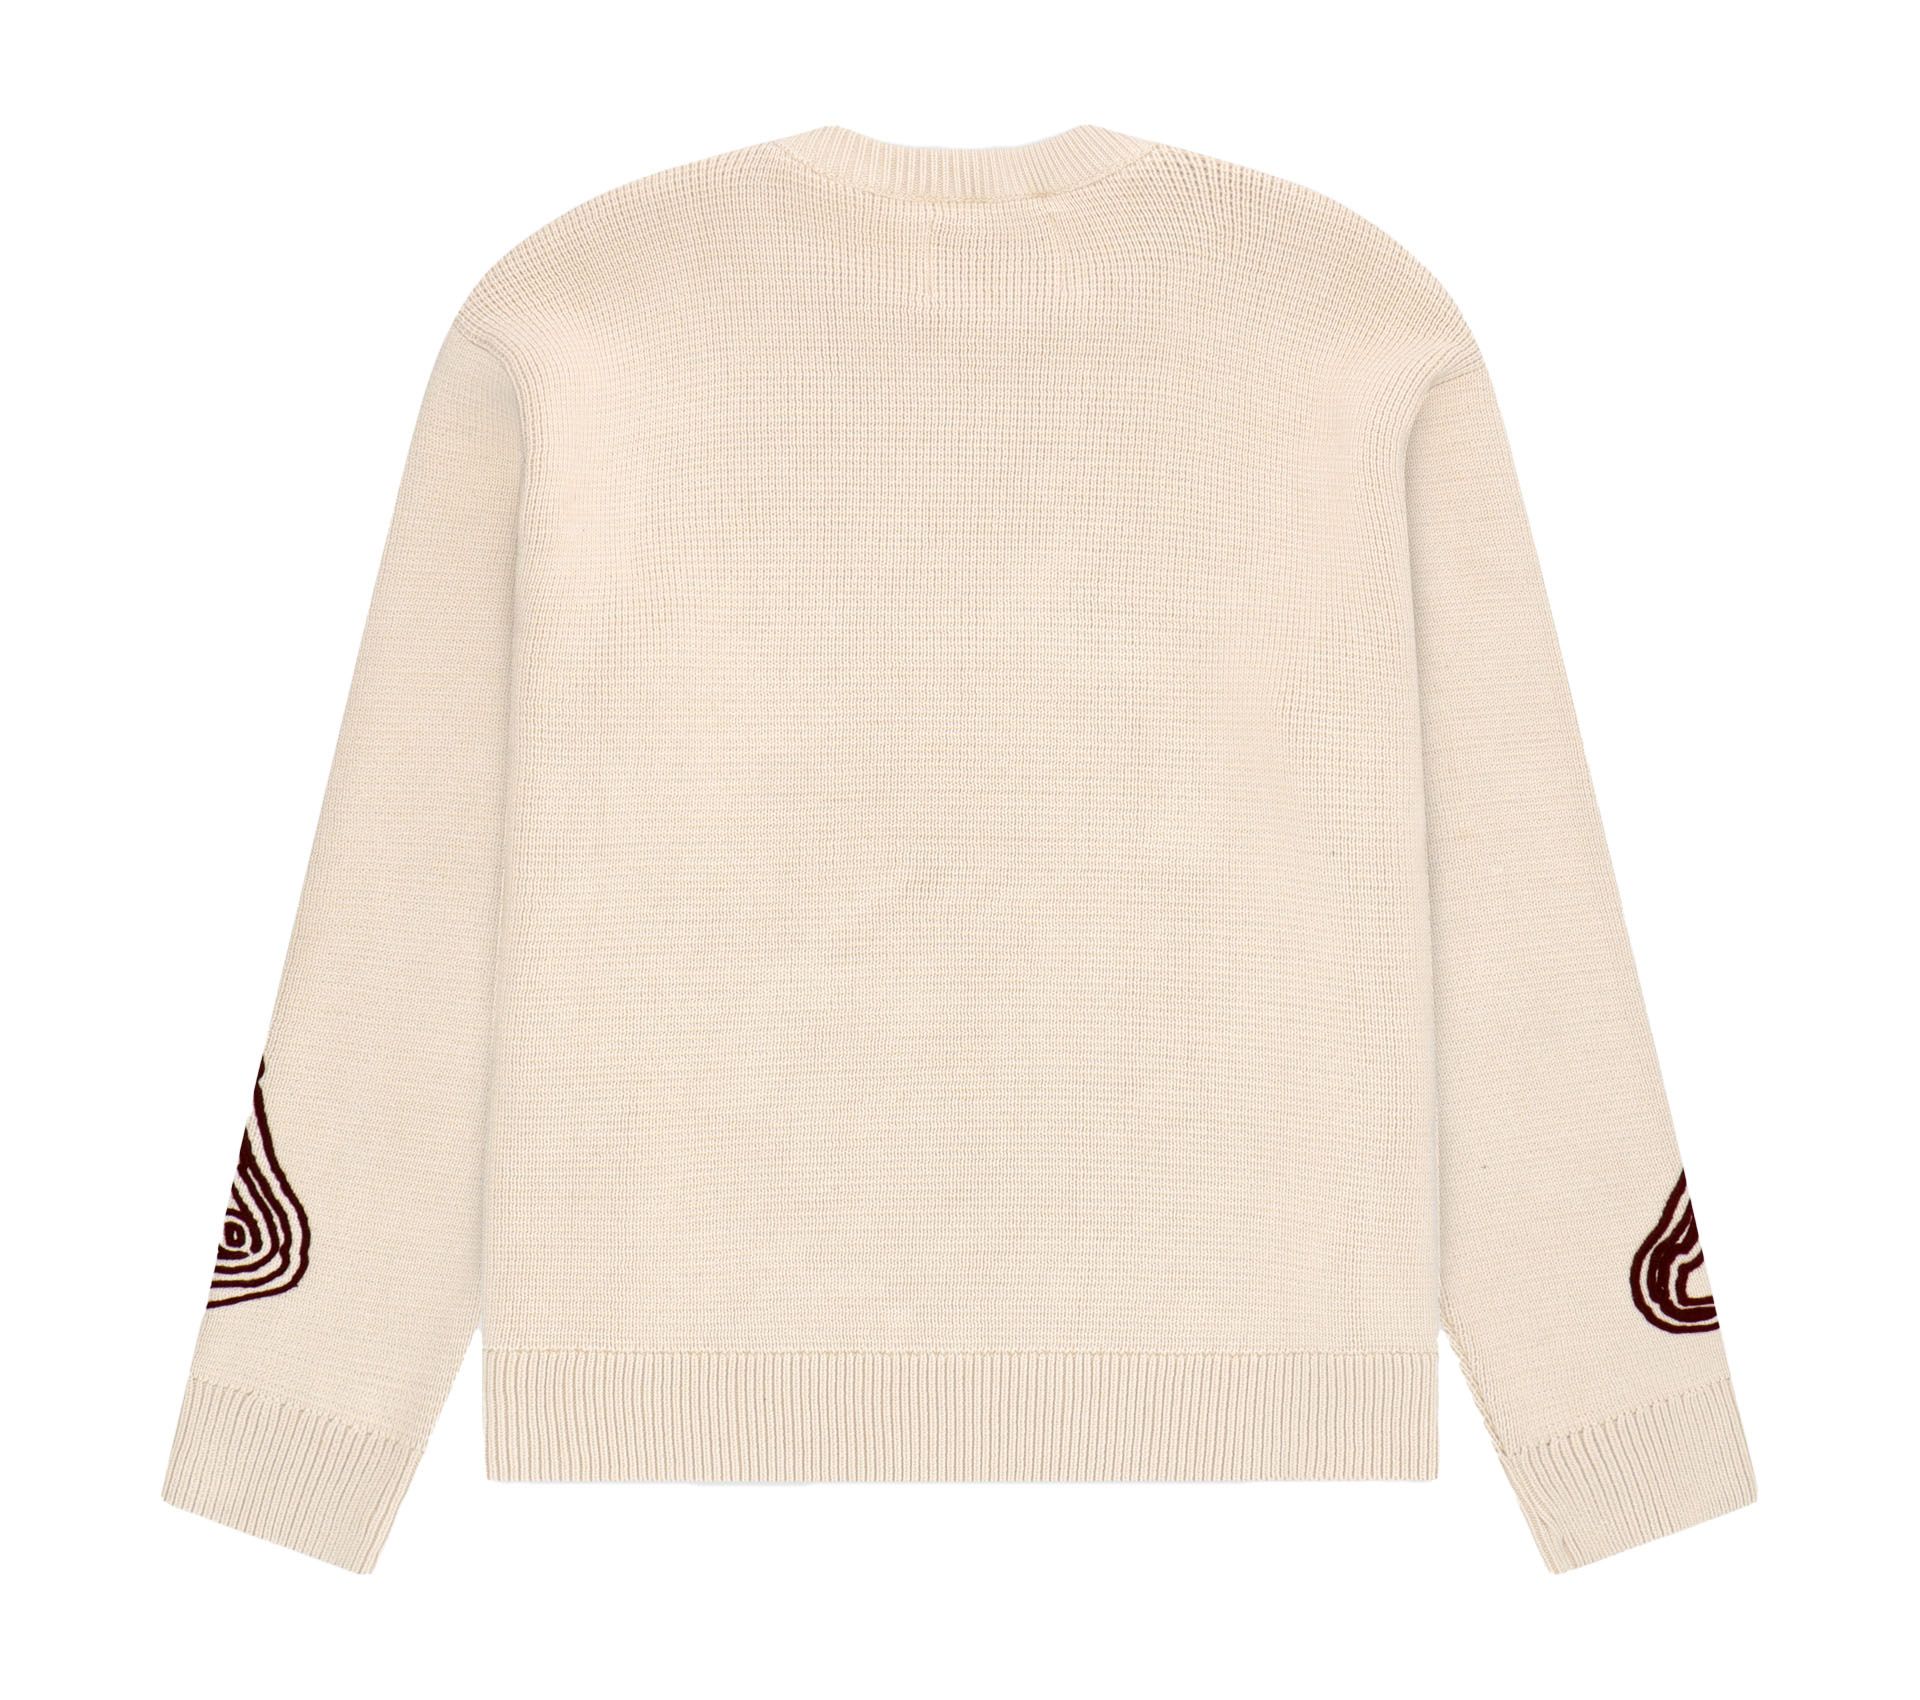 Image #1 of KRIS FIGHTER SWEATER